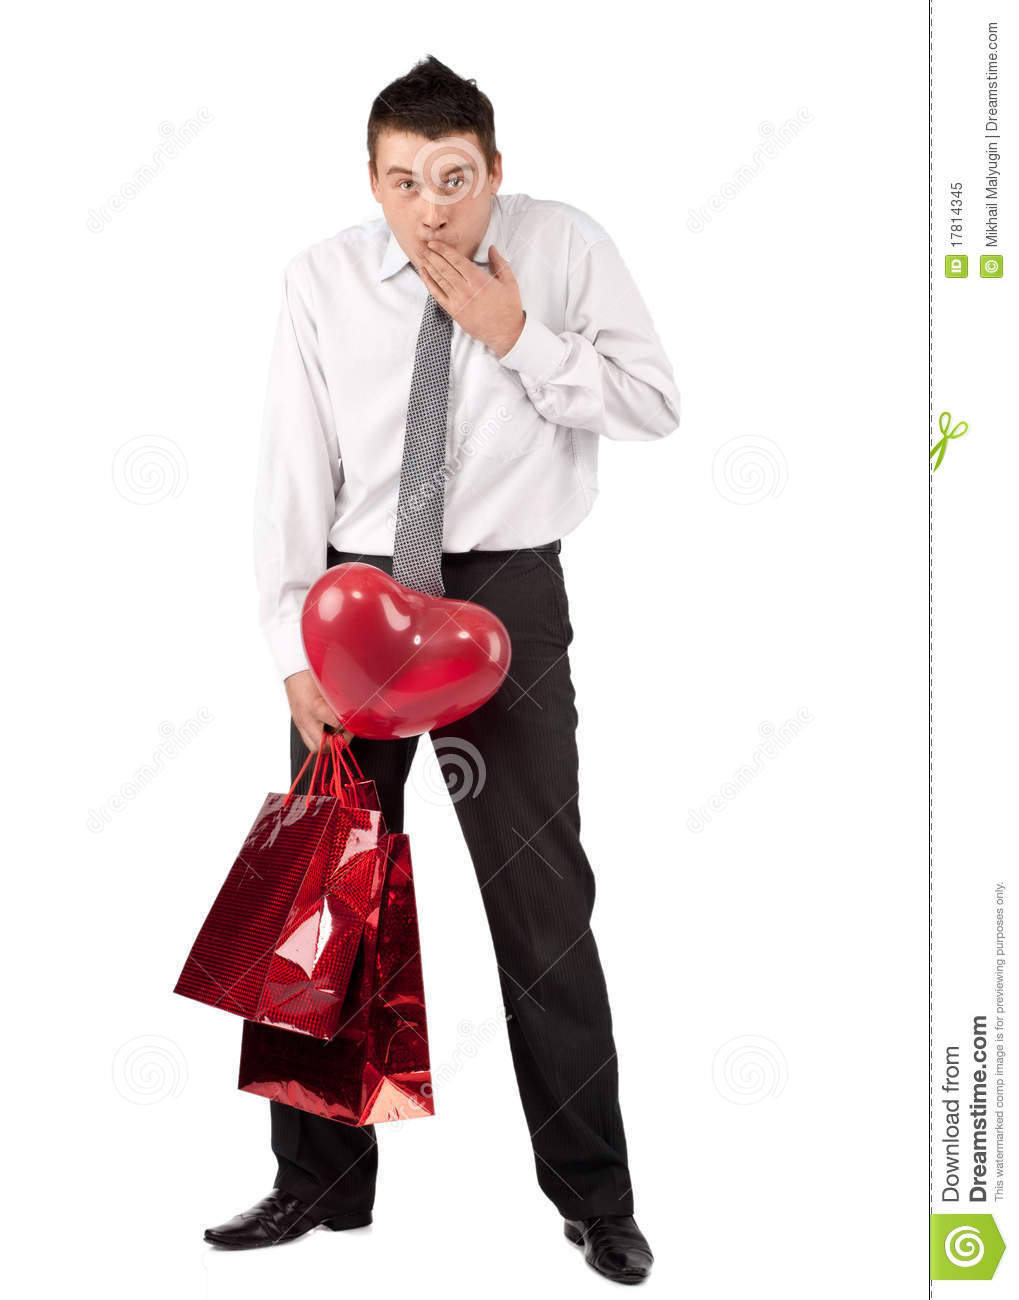 Man Valentines Day Gift
 Man With Gifts For Valentine S Day Stock Image Image of